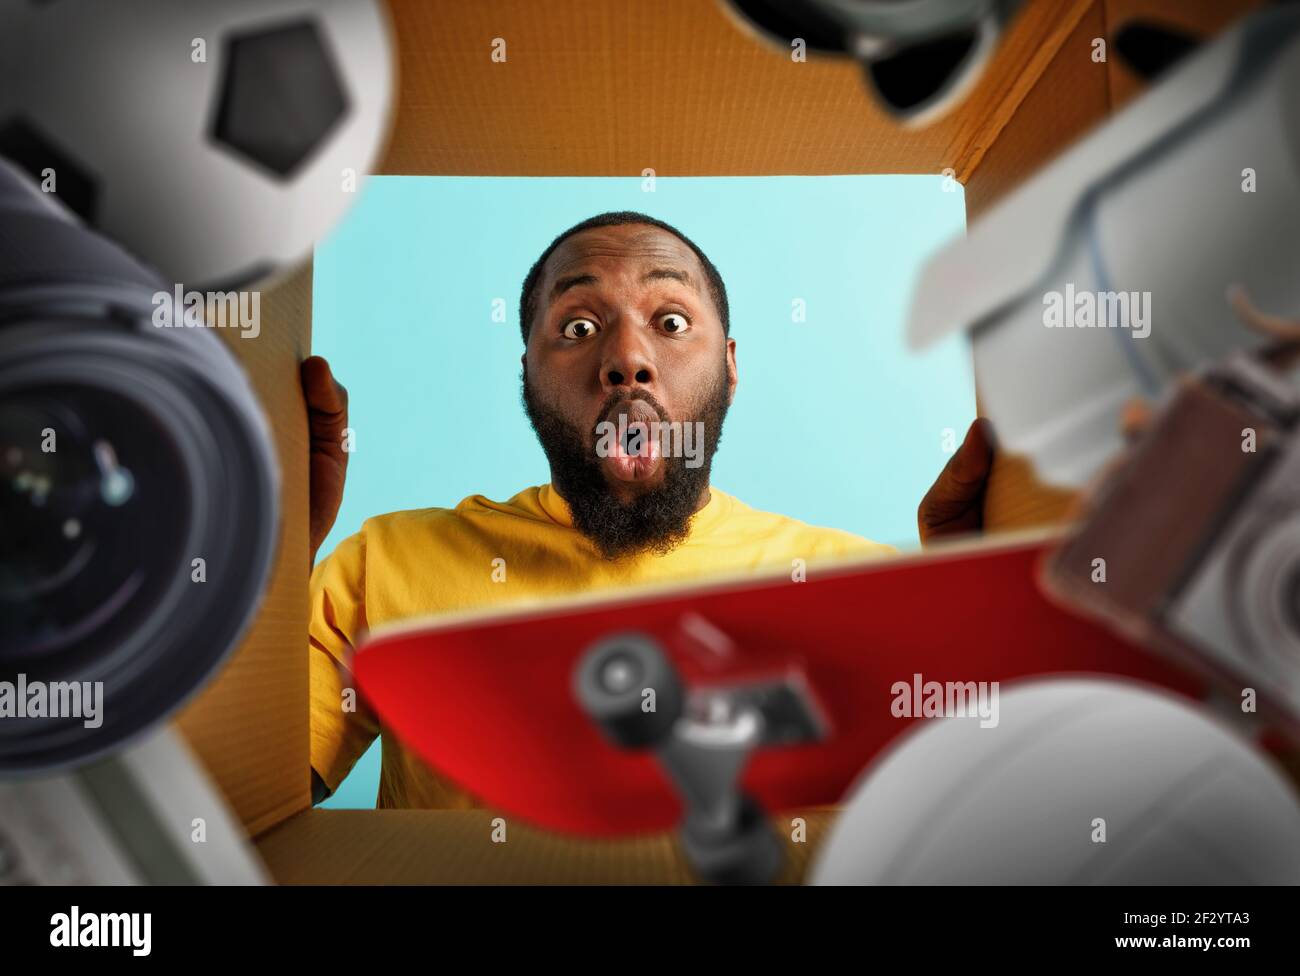 Happy man receives a package full of objects like camera lens, soccer ball, skateboard. happy and surprised expression. Stock Photo